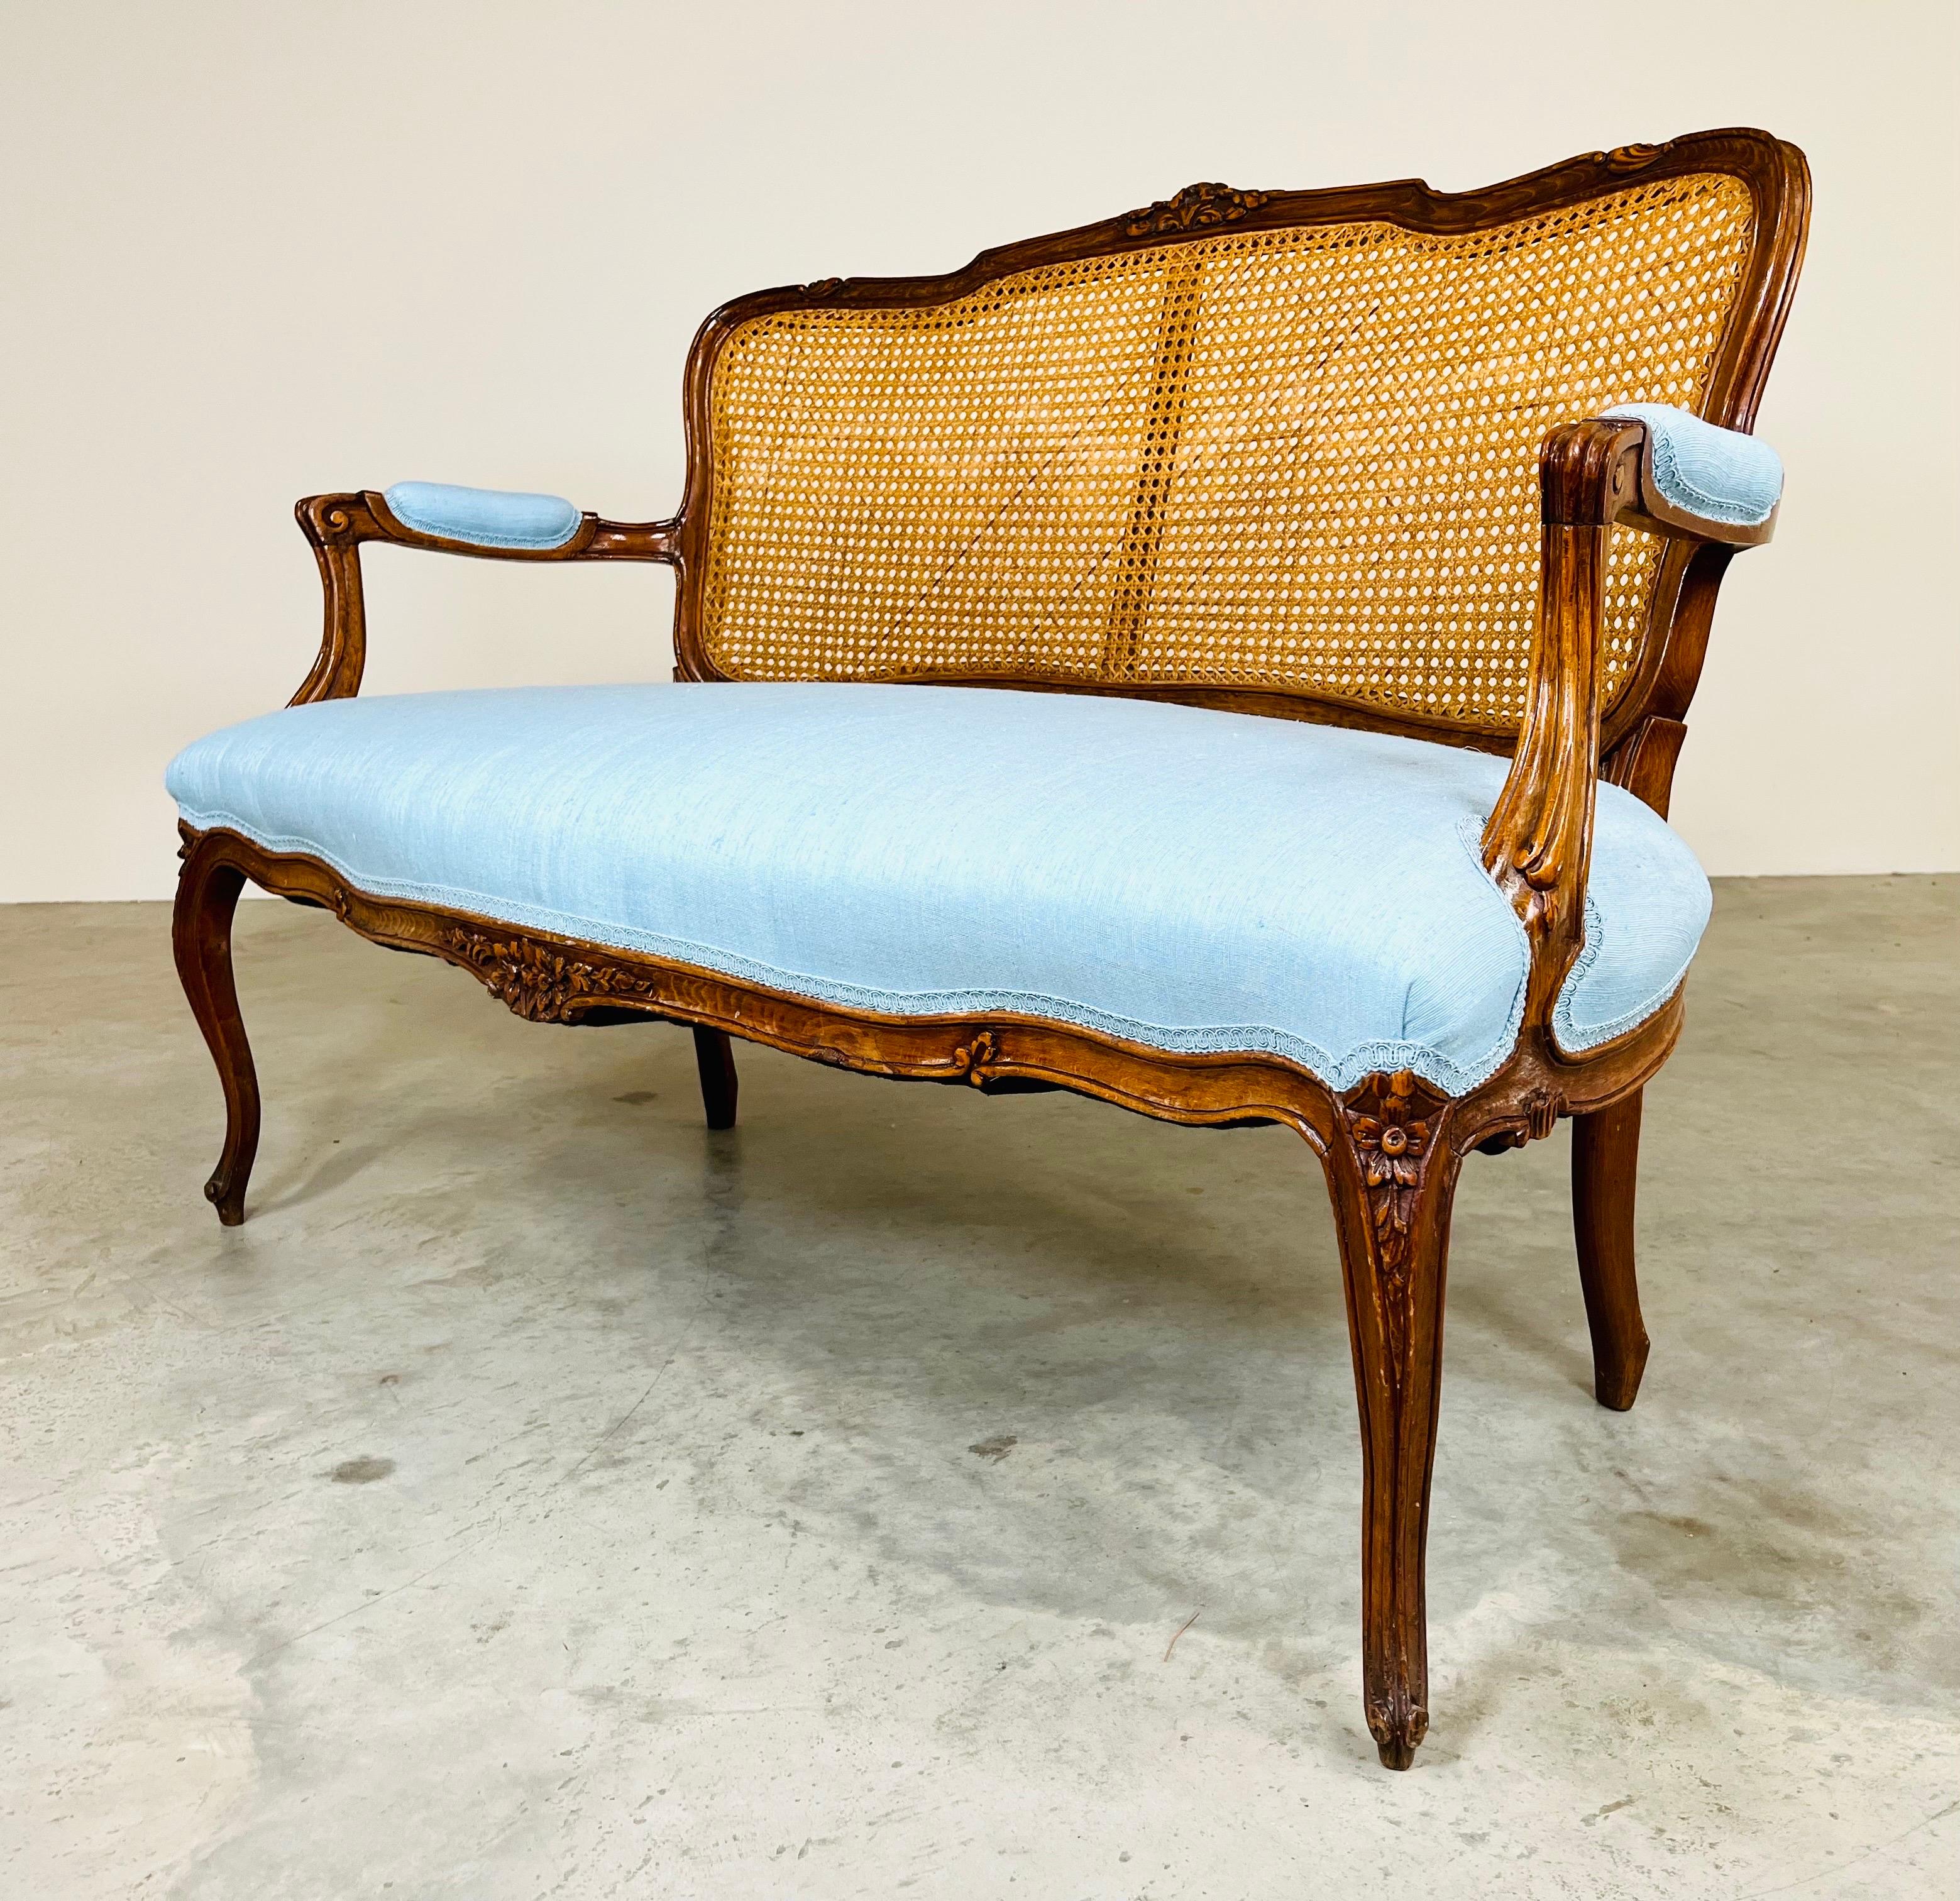 19th Century Hand Carved Walnut Louis XV Settee or Bench with Silk Upholstery For Sale 5